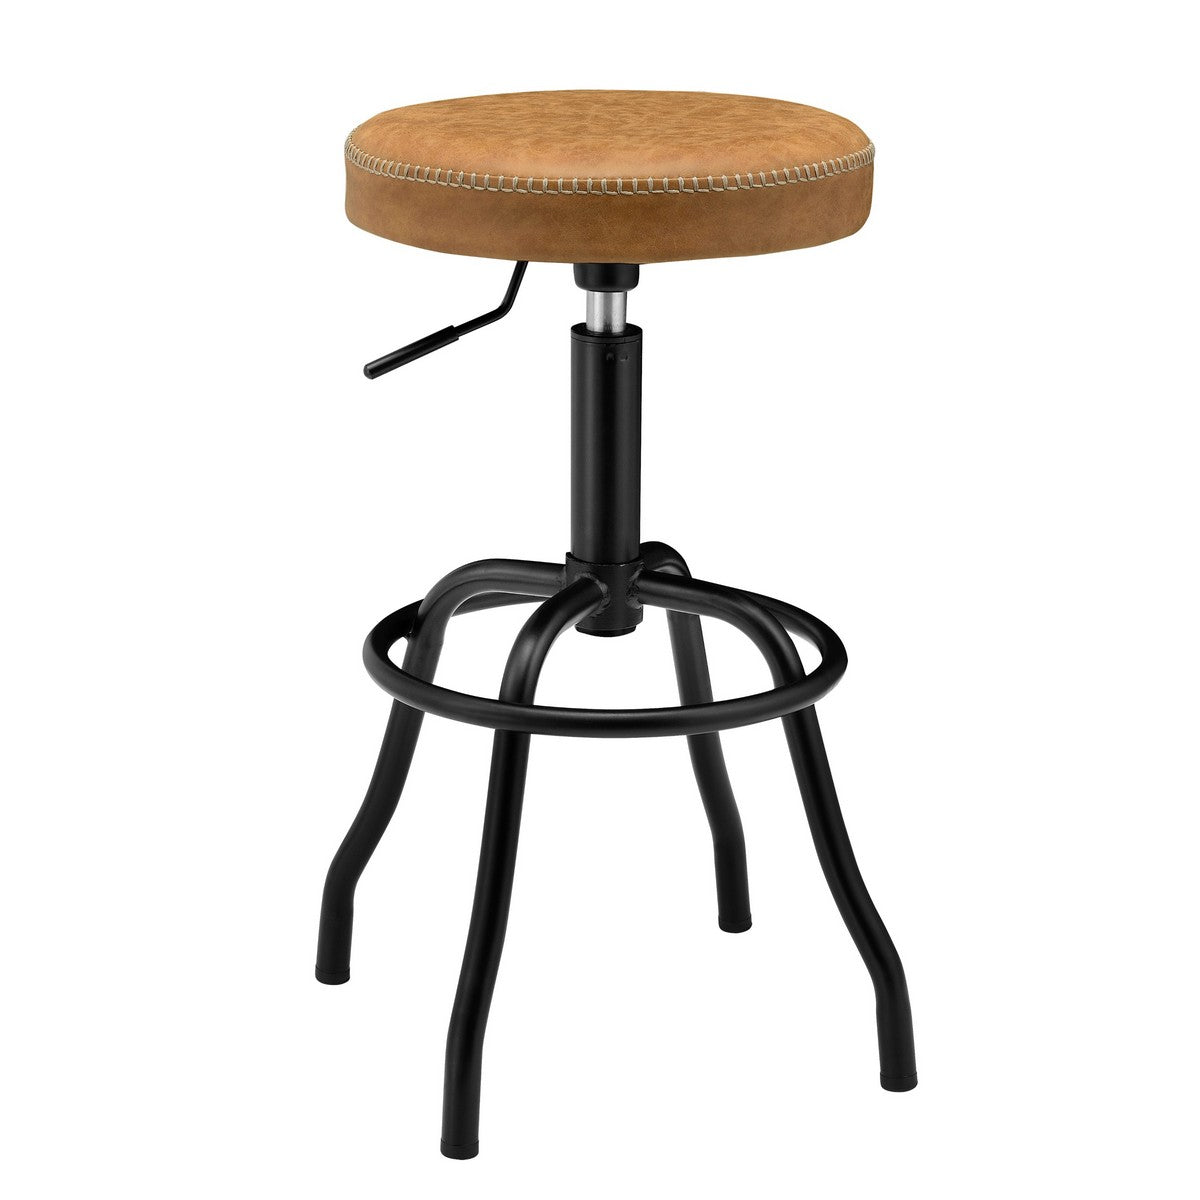 Eaton PU Leather Gaslift Backless Swivel Bar Stool by New Pacific Direct - 9300042